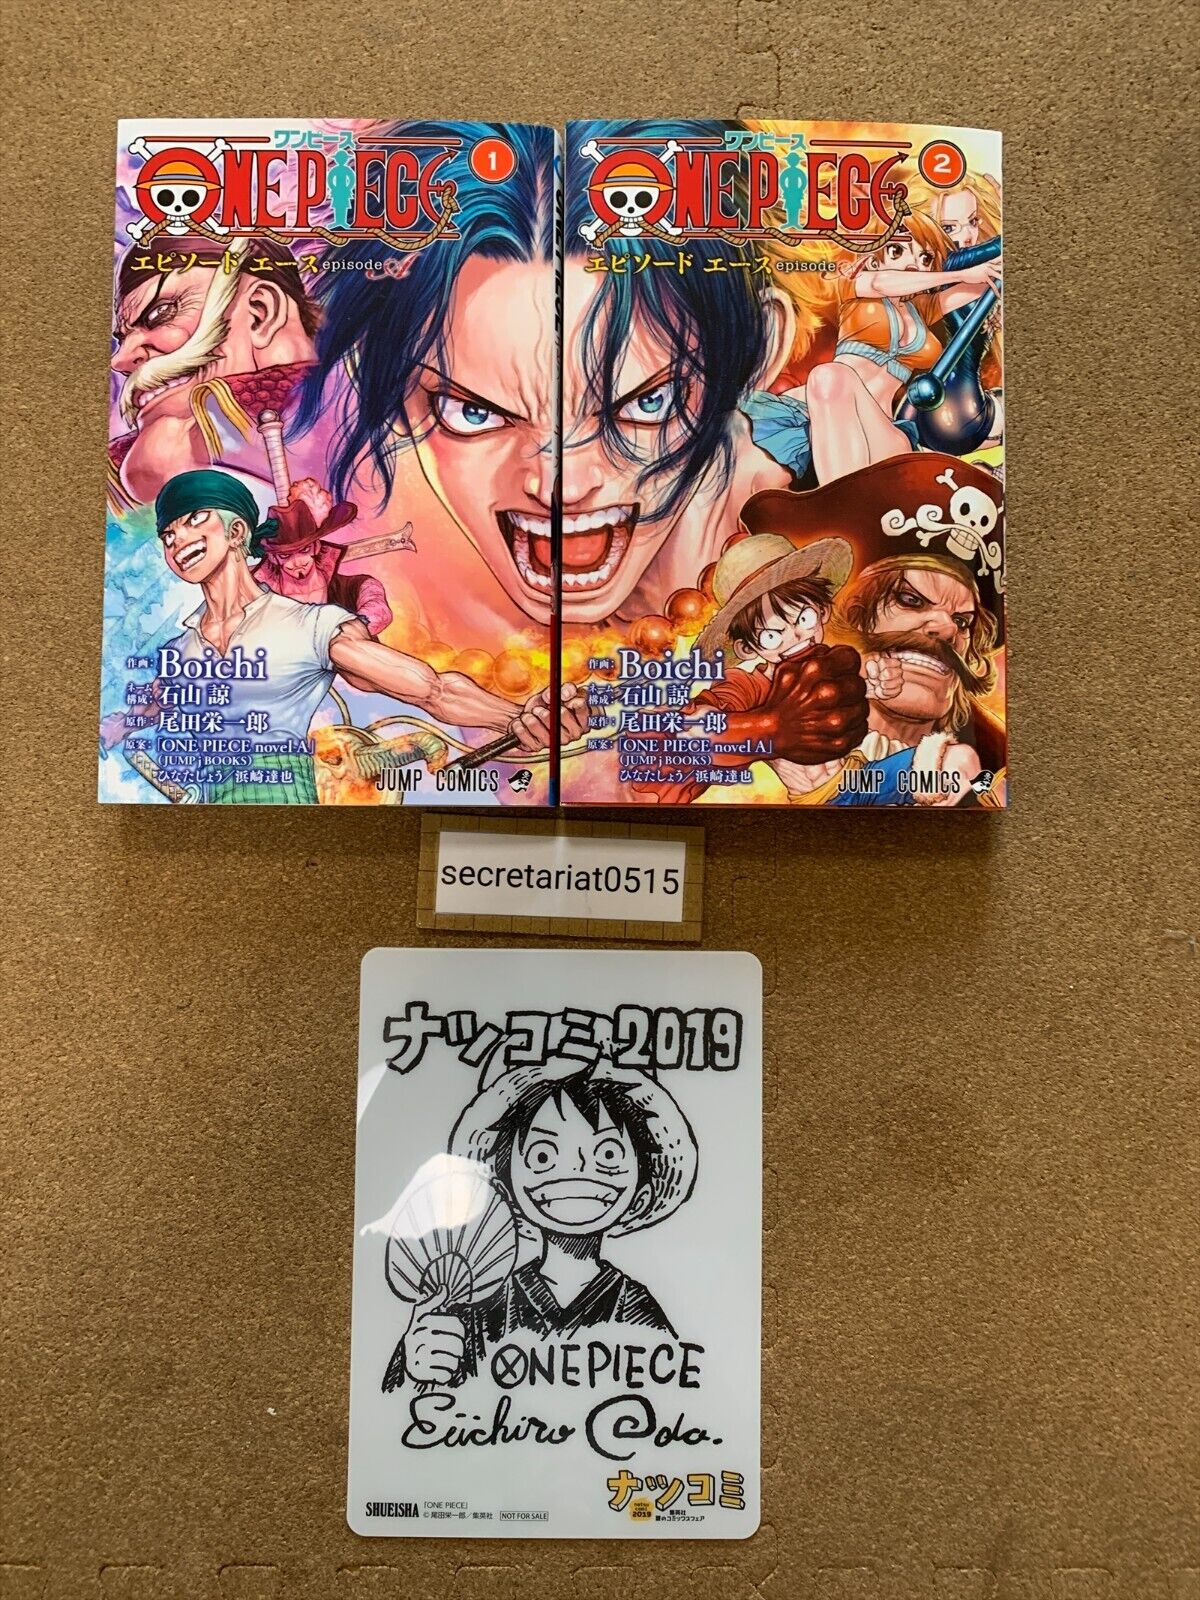 One Piece Episode Ace Comic Vol.1 and 2 w/ Luffy Card Autographed Eiichiro Oda